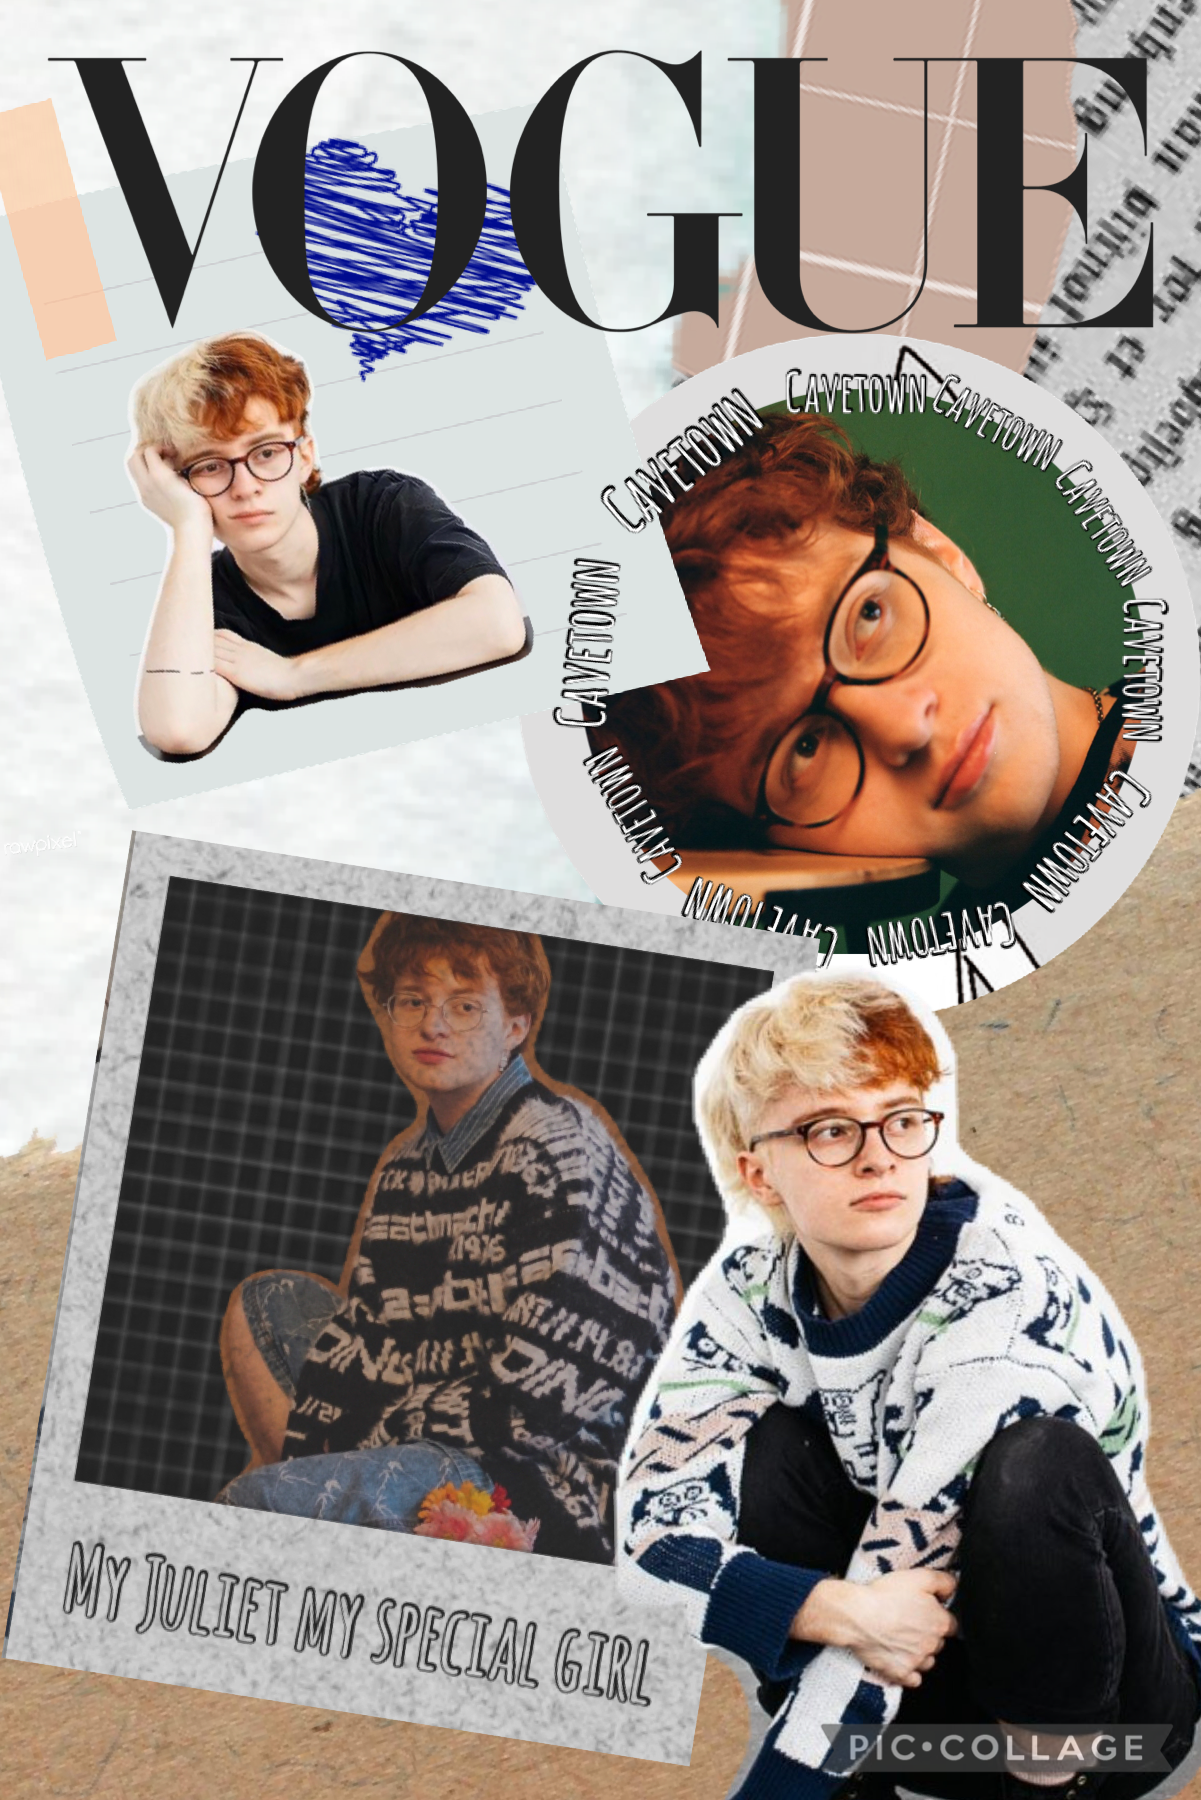 ❤️ TAPPITY TAP TAP! ❤️
❤️ cavetown collage ❤️
❤️ i like this :) ❤️
❤️ i’m really sad the @Avocadorable is leaving and i need a full day to cry ❤️
❤️ love y’all T.T❤️